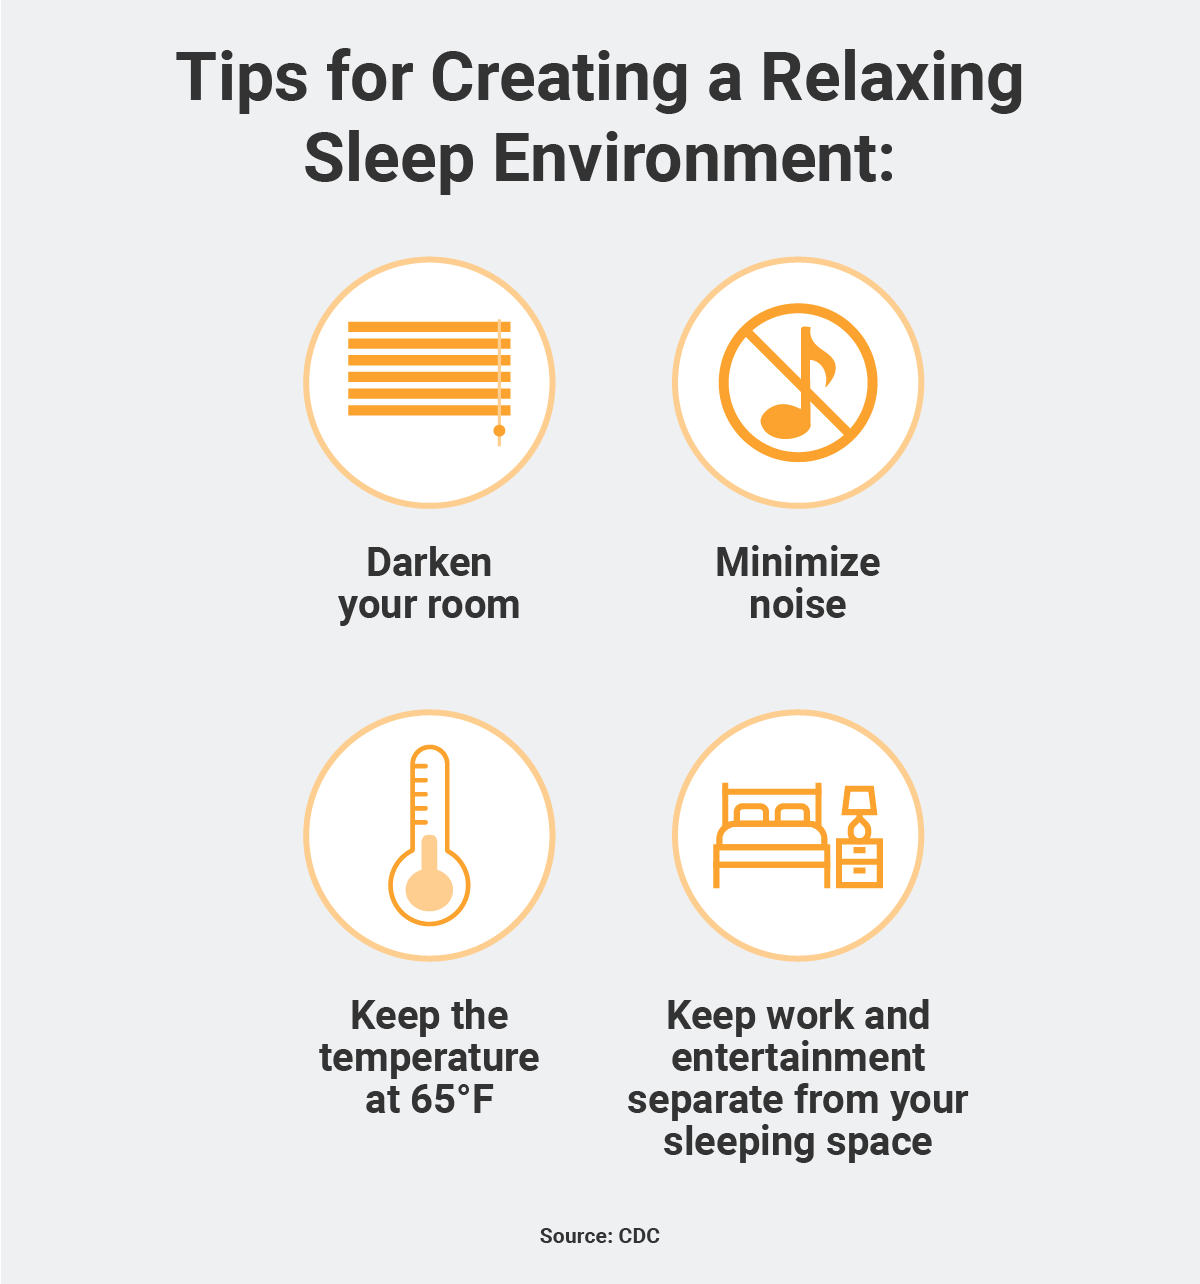 Tips for creating a relaxing sleep environment infographic